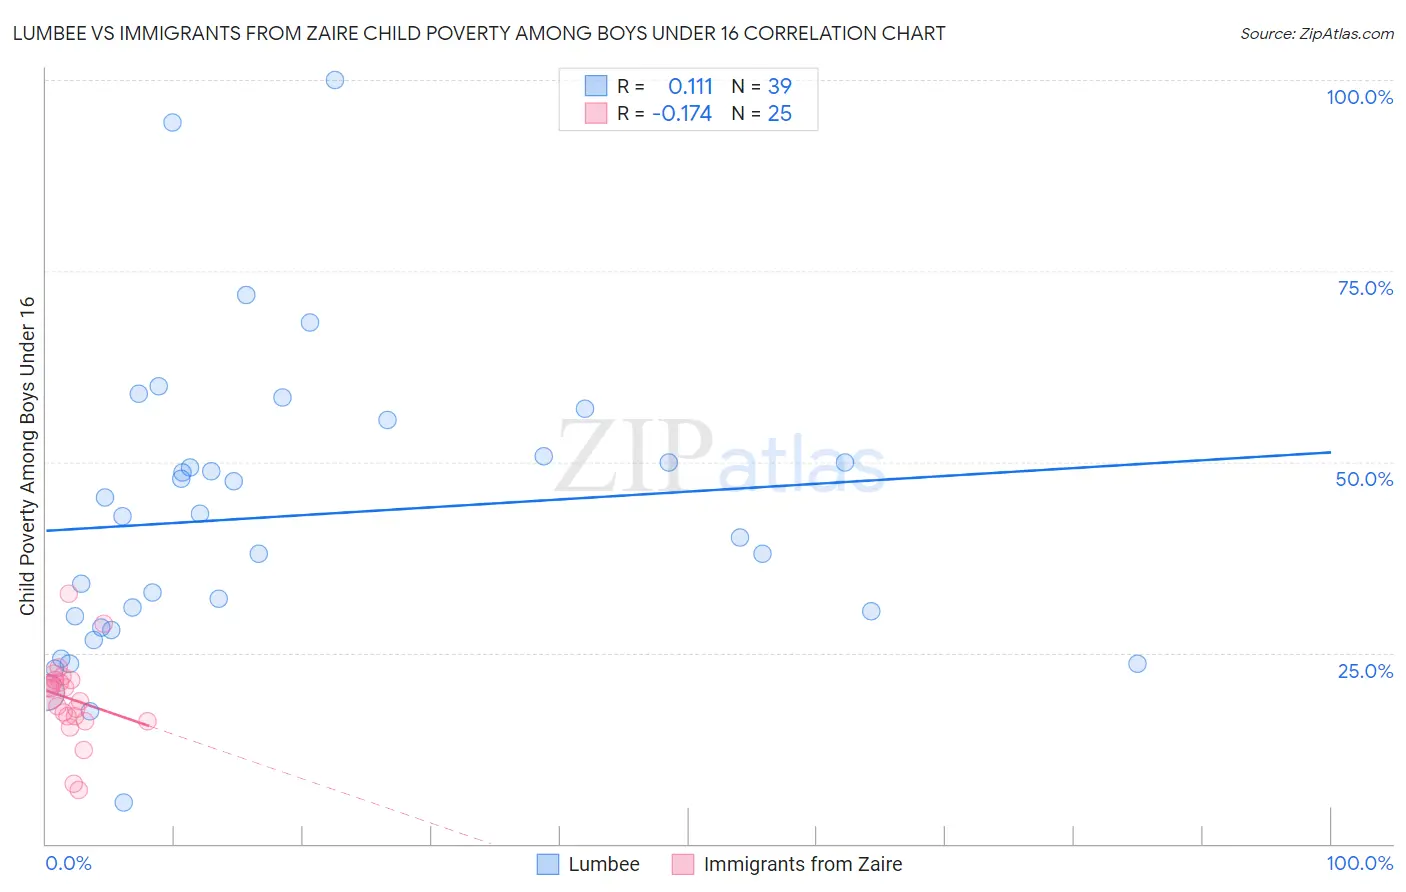 Lumbee vs Immigrants from Zaire Child Poverty Among Boys Under 16